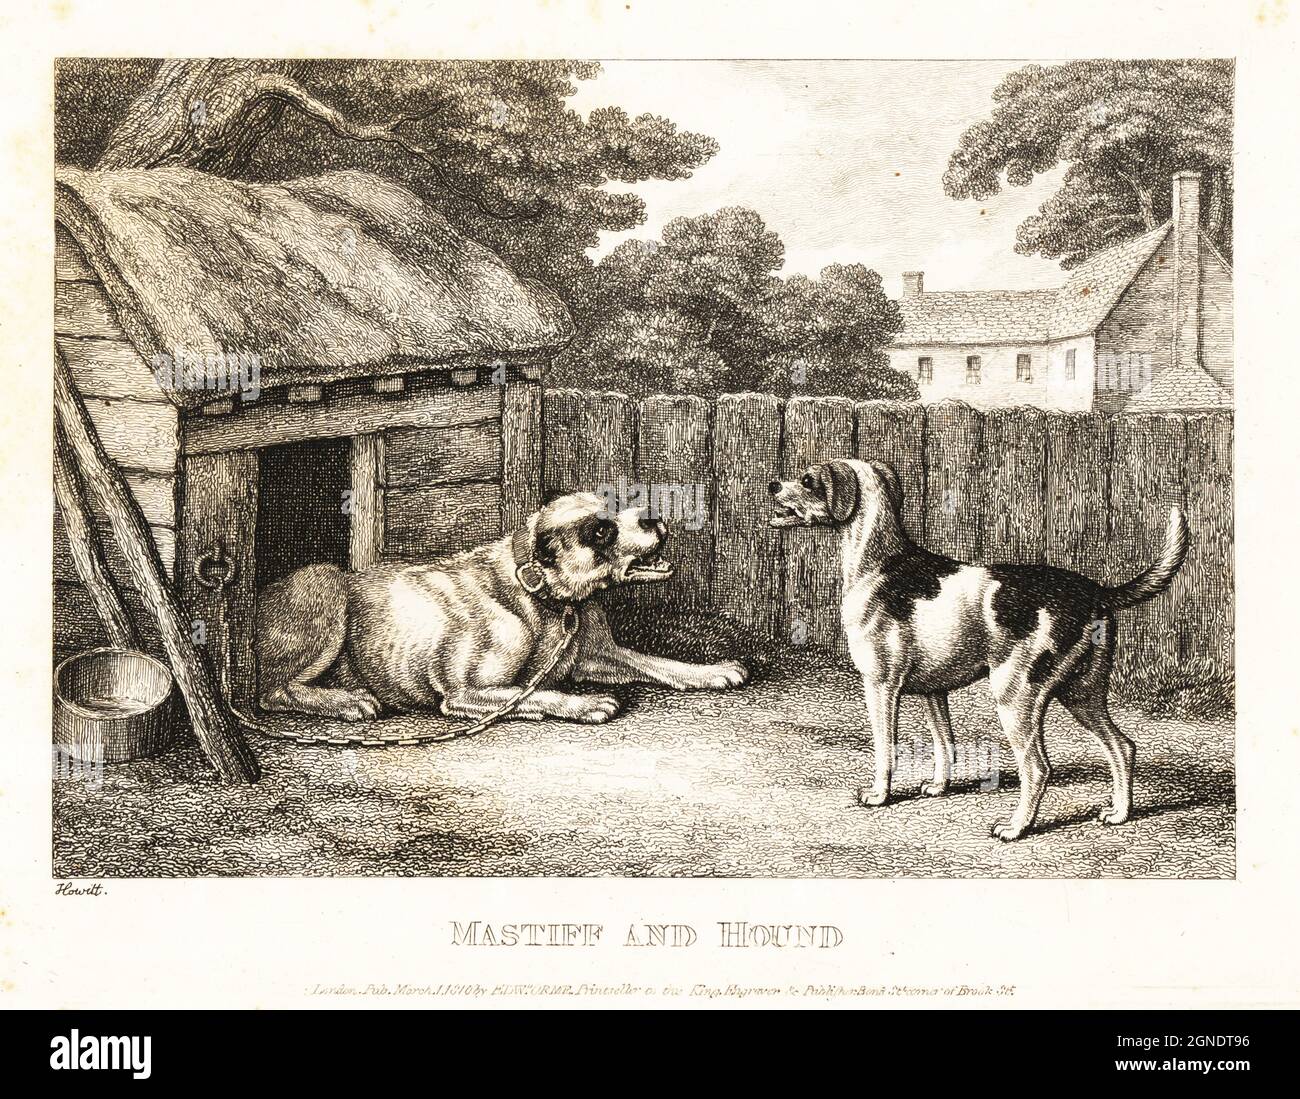 A mastiff chained to a kennel arguing with a hunting hound. The fox hound complains that the guard dog is fed with meat from the chase despite doing nothing. Mastiff and hound. Illustration of a fable by Greek author Aesop. Copperplate etching drawn and engraved from life by Samuel Howitt from his own A New Work of Animals, Principally Designed from the Fables of Aesop, Gay and Phaedrus, Edward Orme, London, 1811. Stock Photo